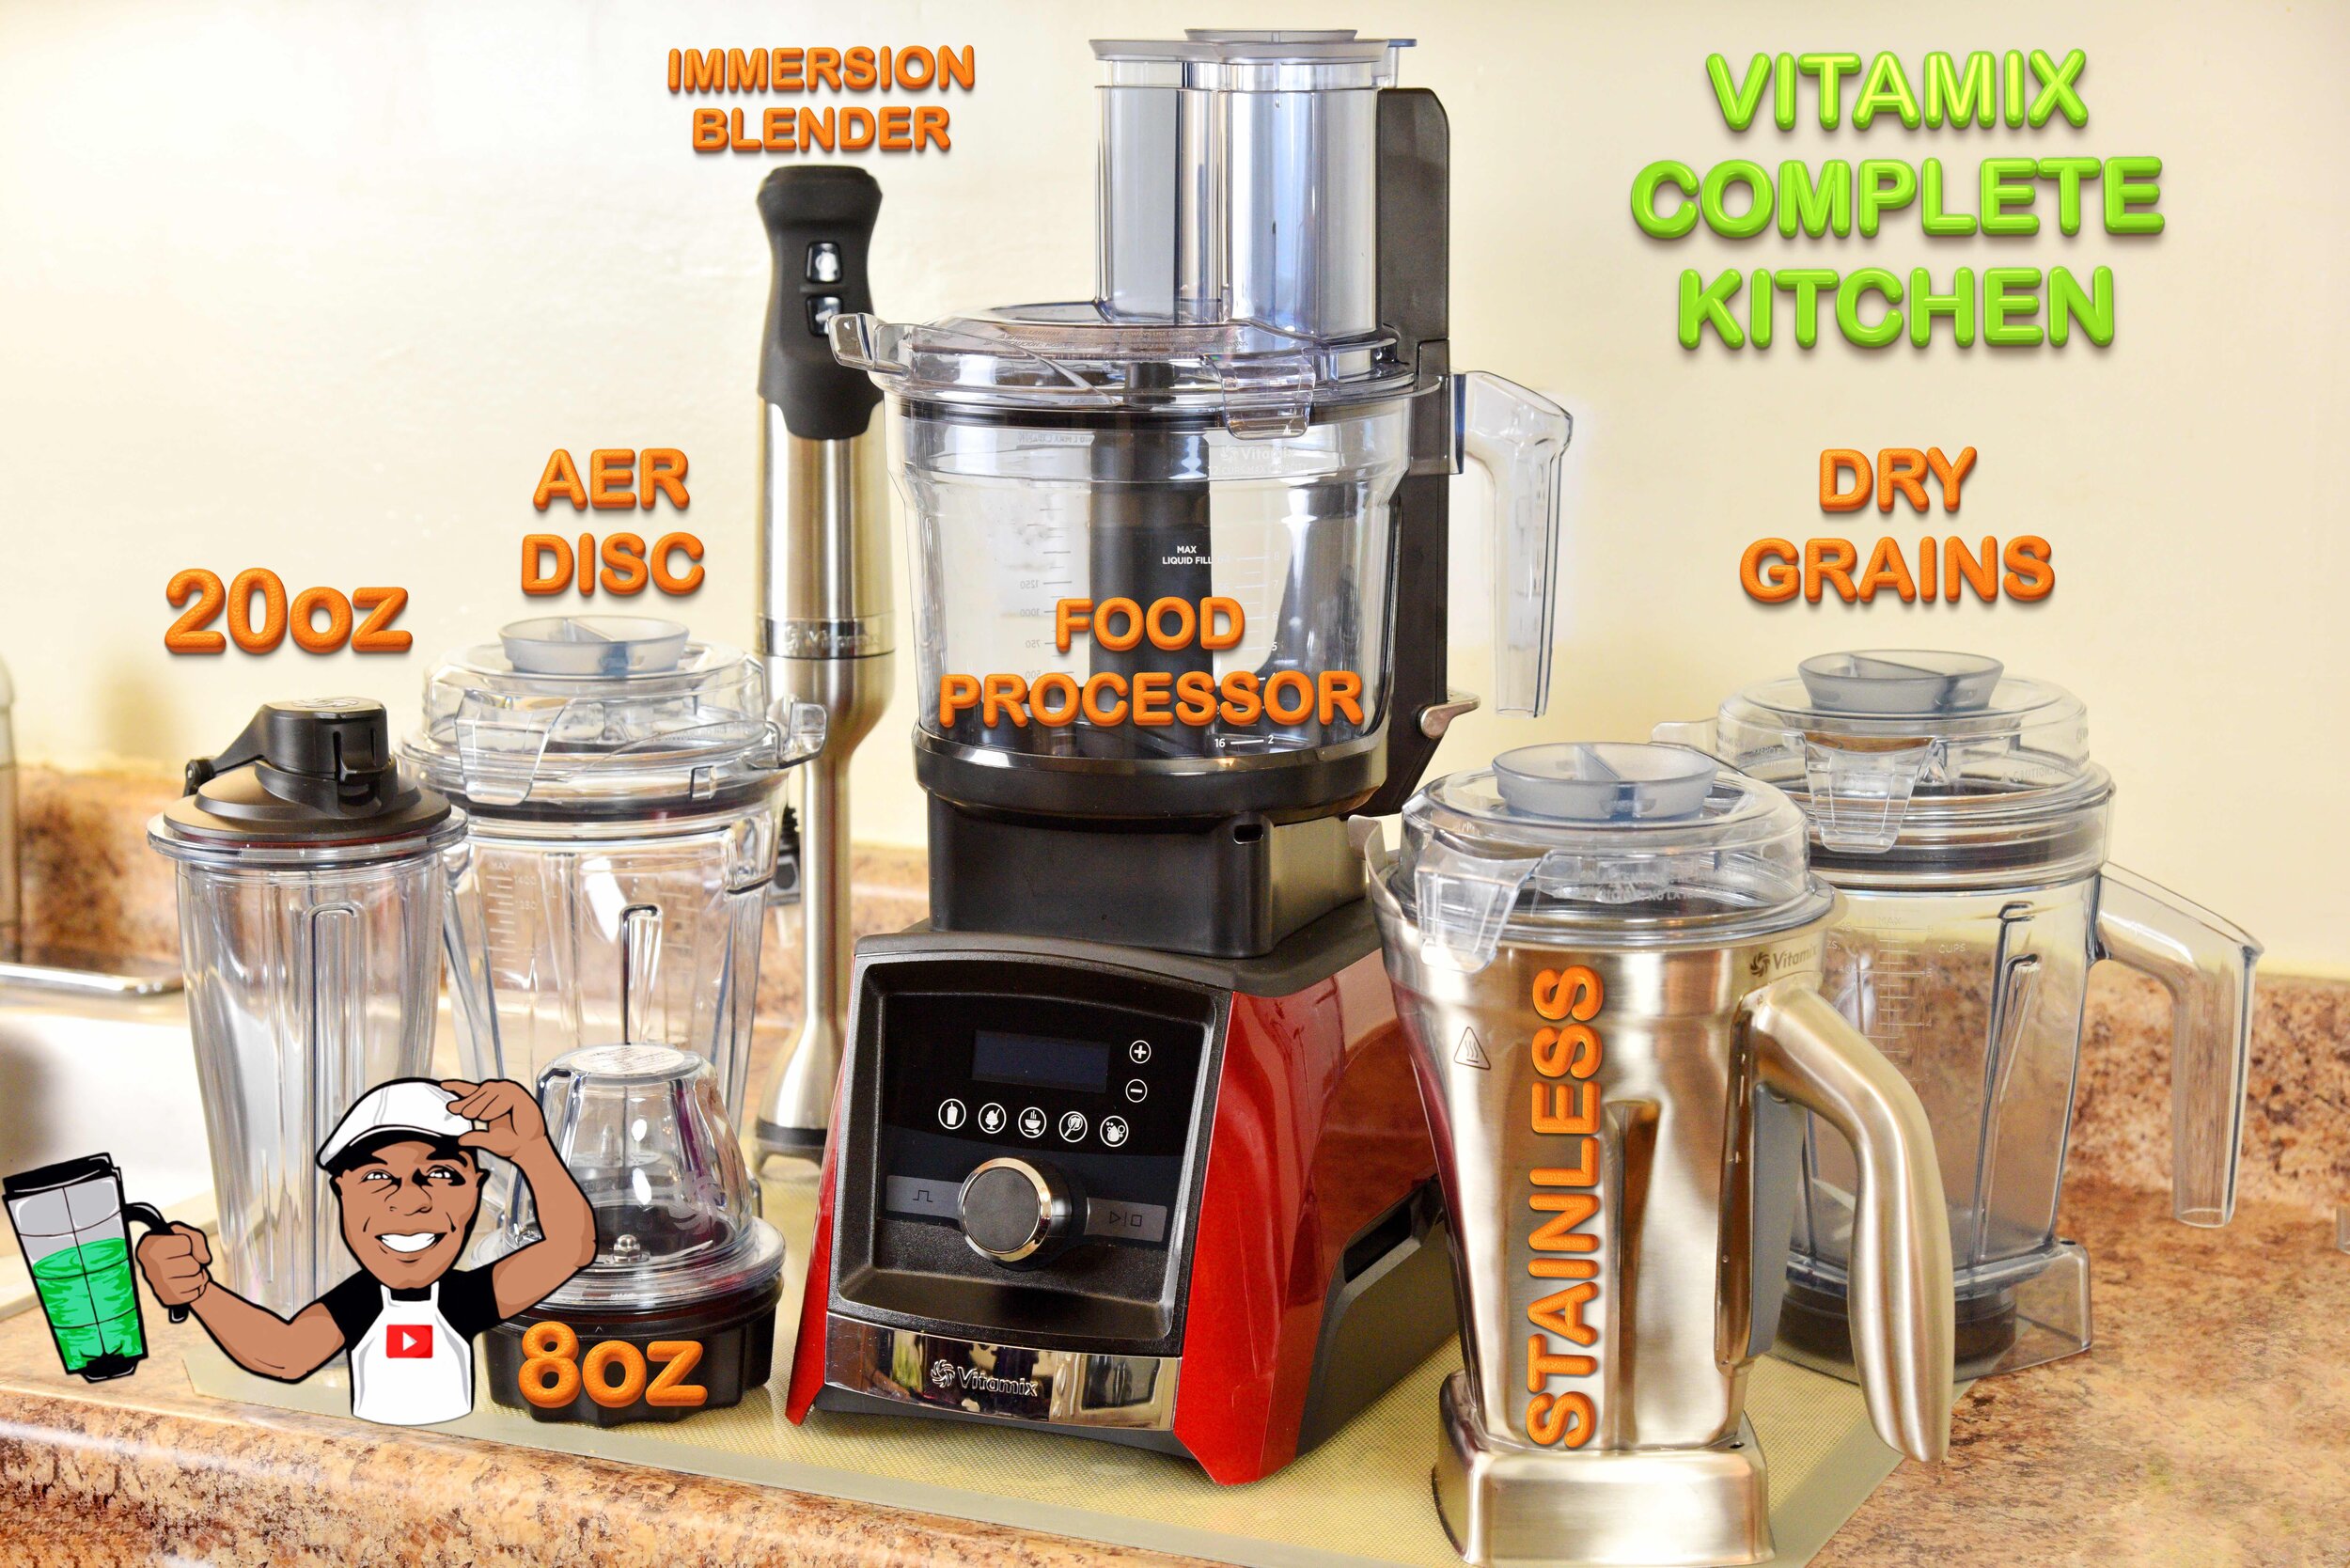 I looooove my Vitamix! And this deluxe immersion blender set are